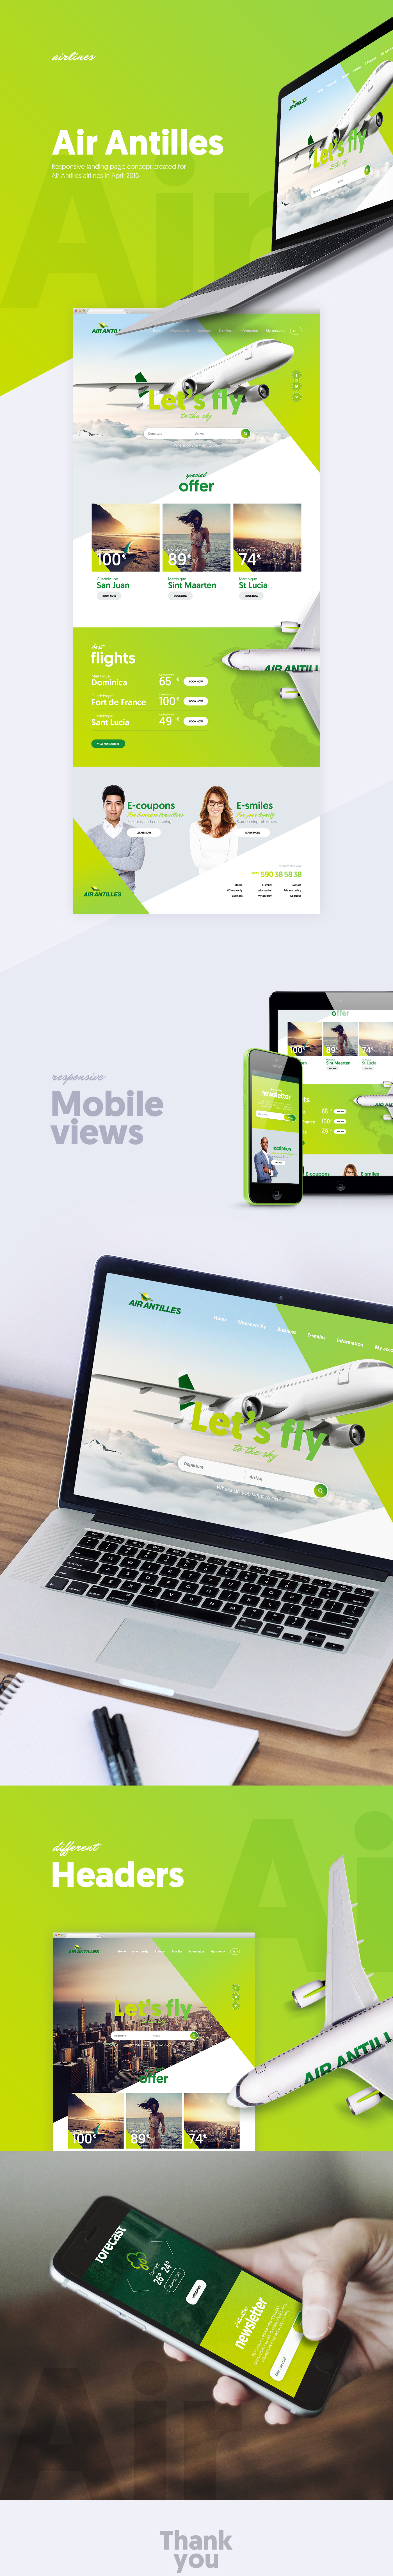 lluck jackiewicz Webdesign ux UI Airlines plane